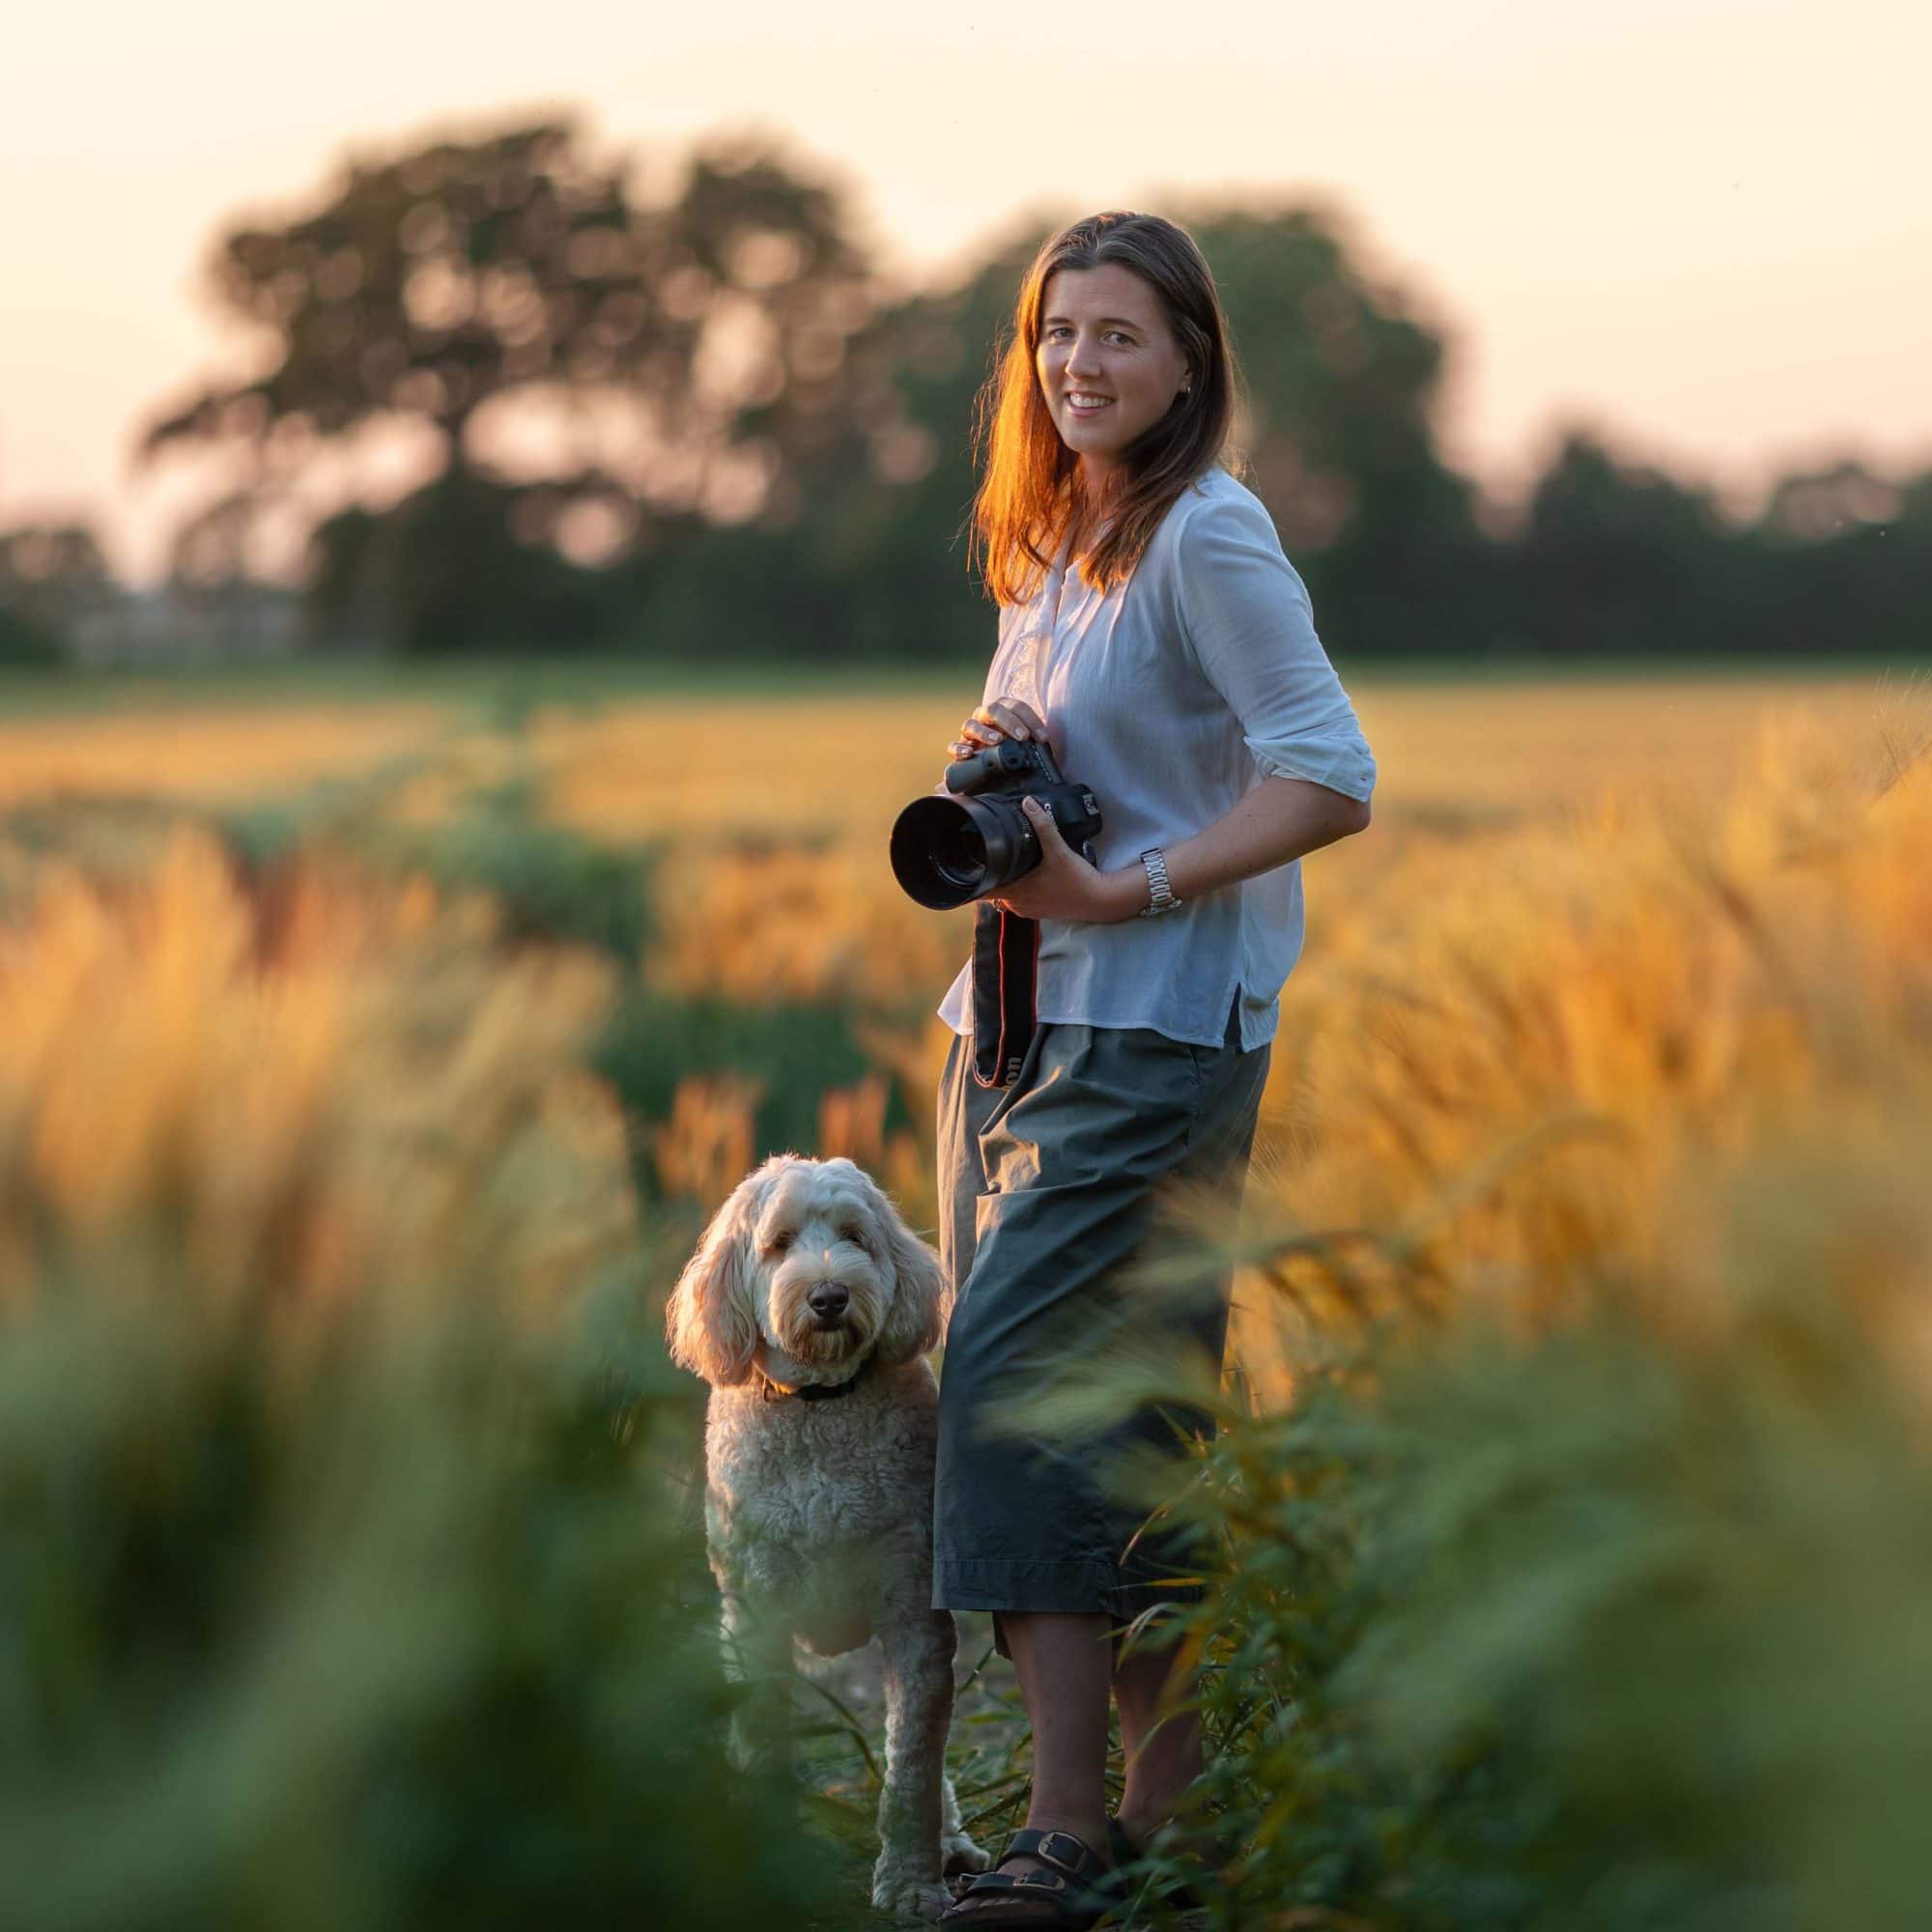 Cambridgeshire photographer, Louisa French, pictured with her dog